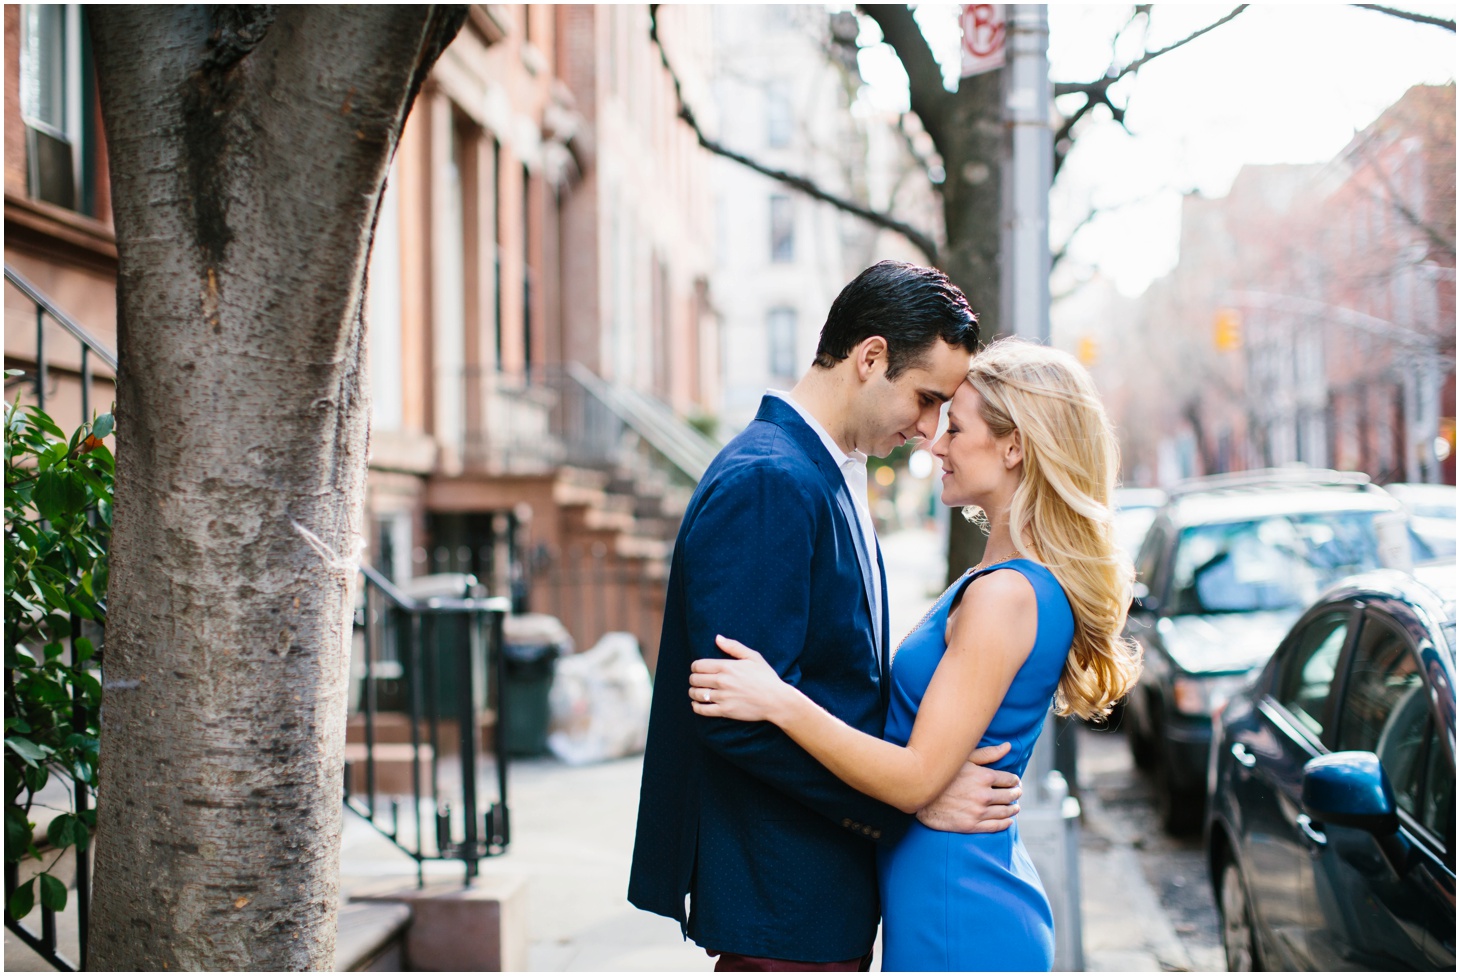 Sunrise Engagement Session in New York City by Sarah Bradshaw Photography